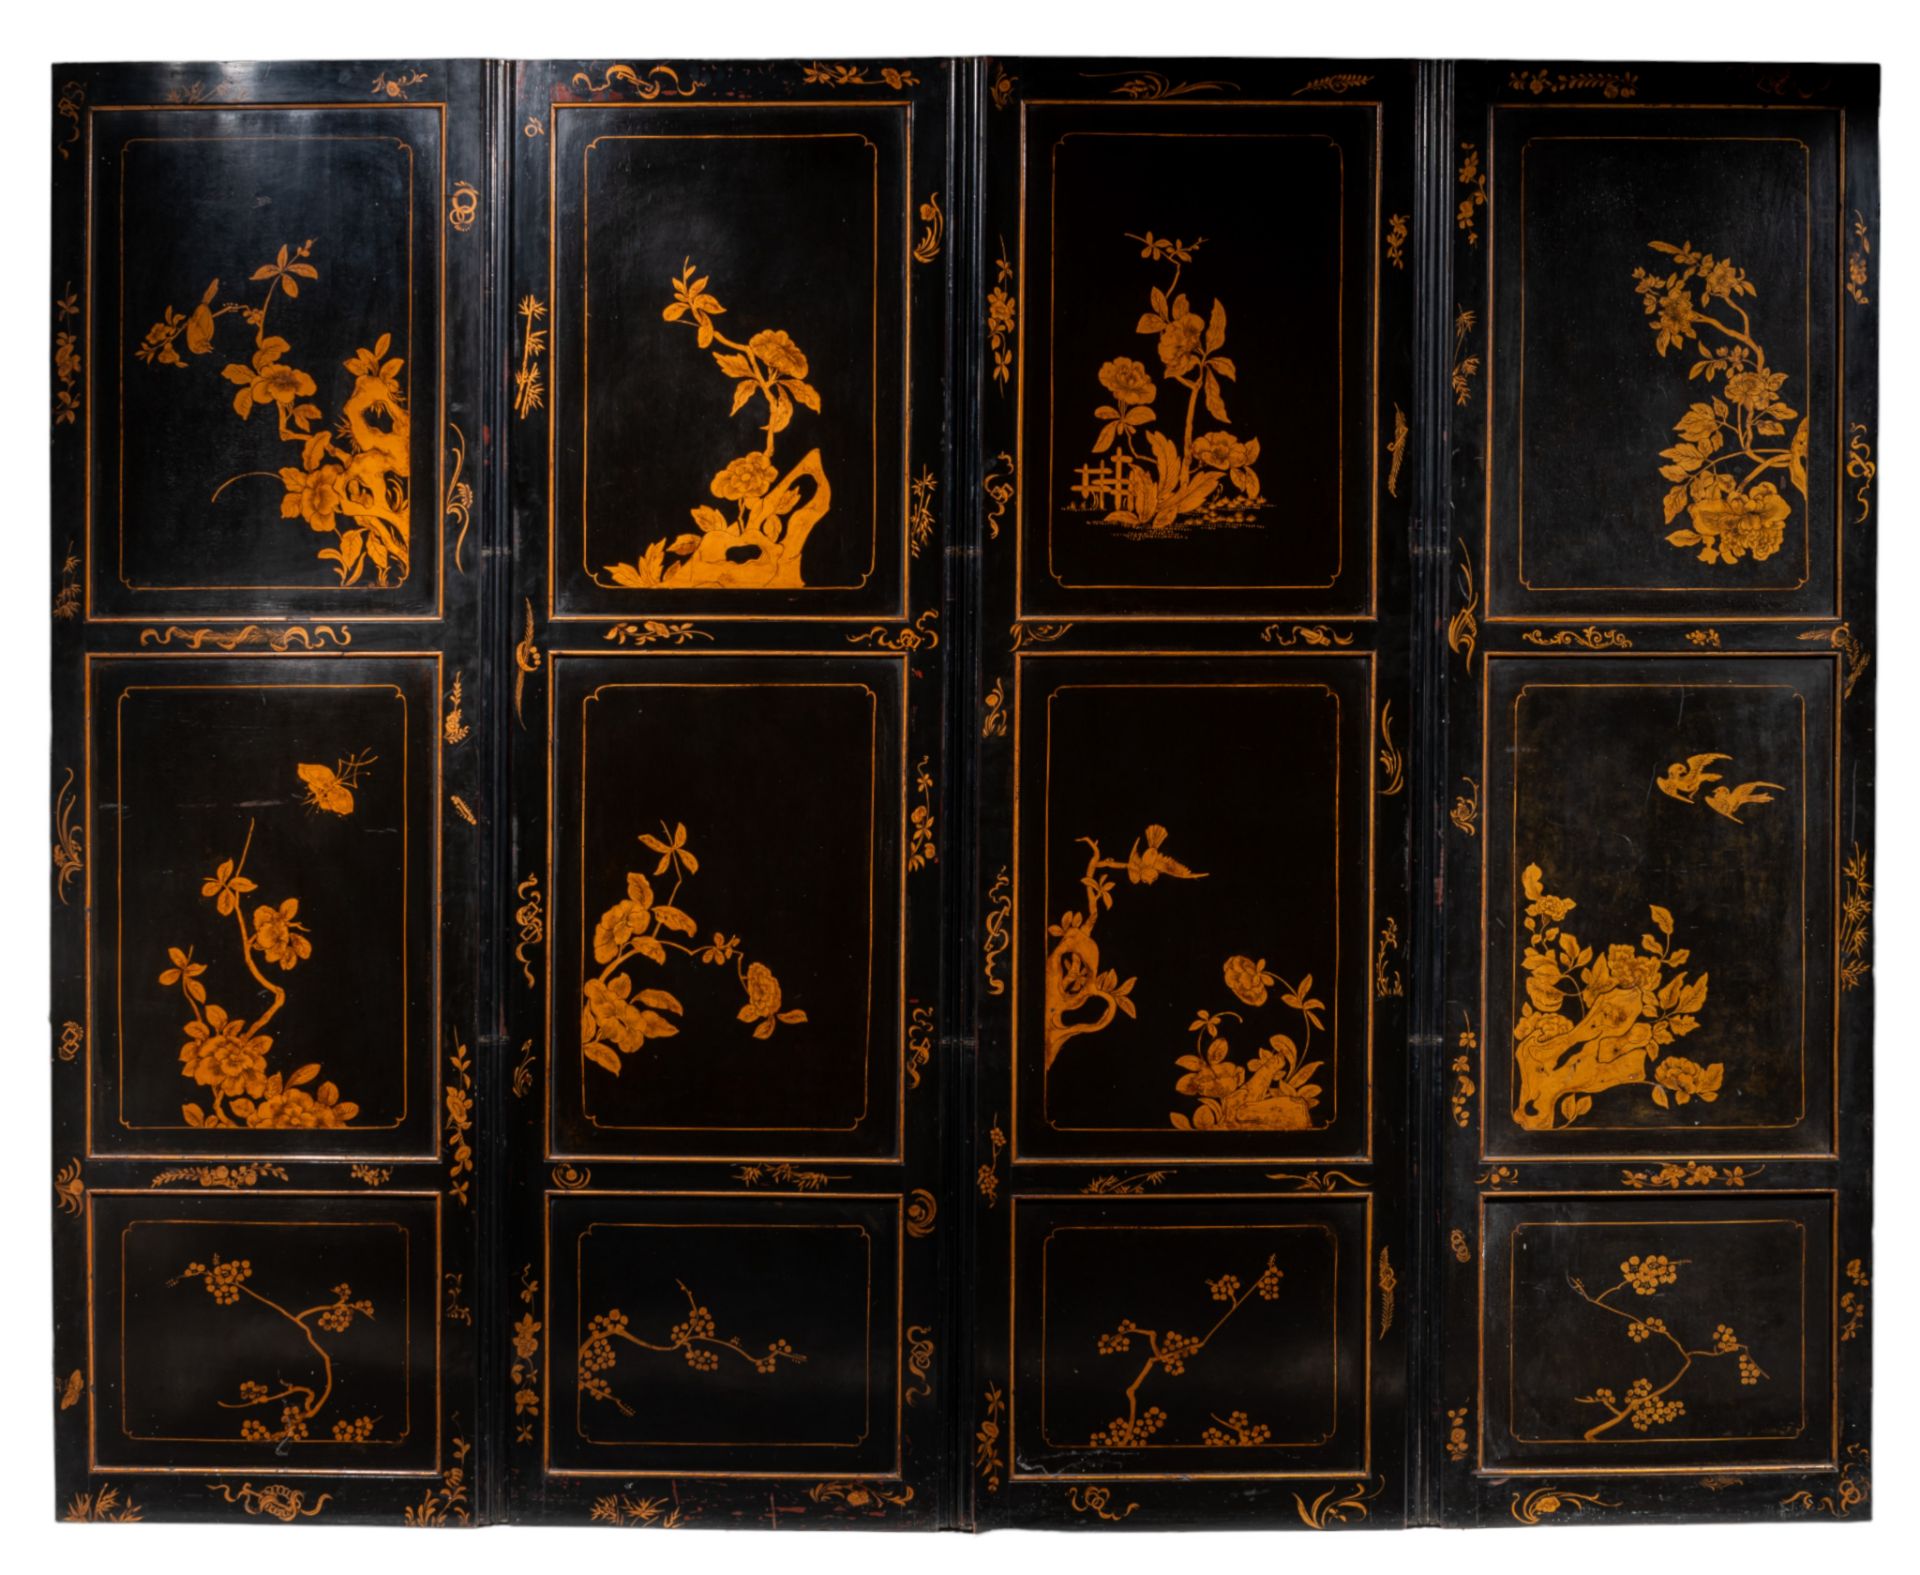 A Chinese gilt and black lacquered four-panel chamber screen, late 18thC, 60 x 198 cm (each panel) - Image 2 of 5